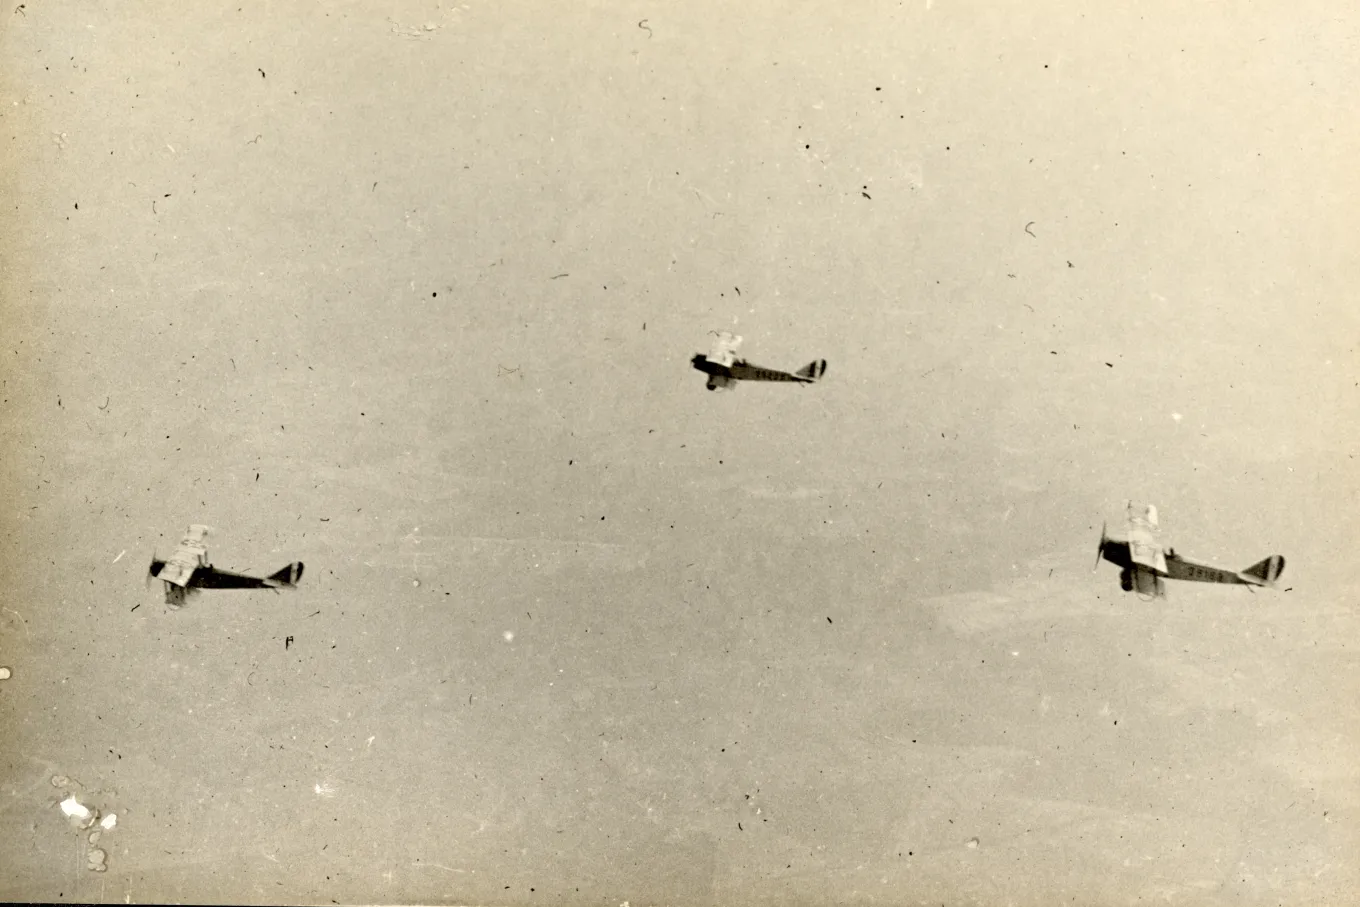 Military aircraft in flight over Selfridge Field